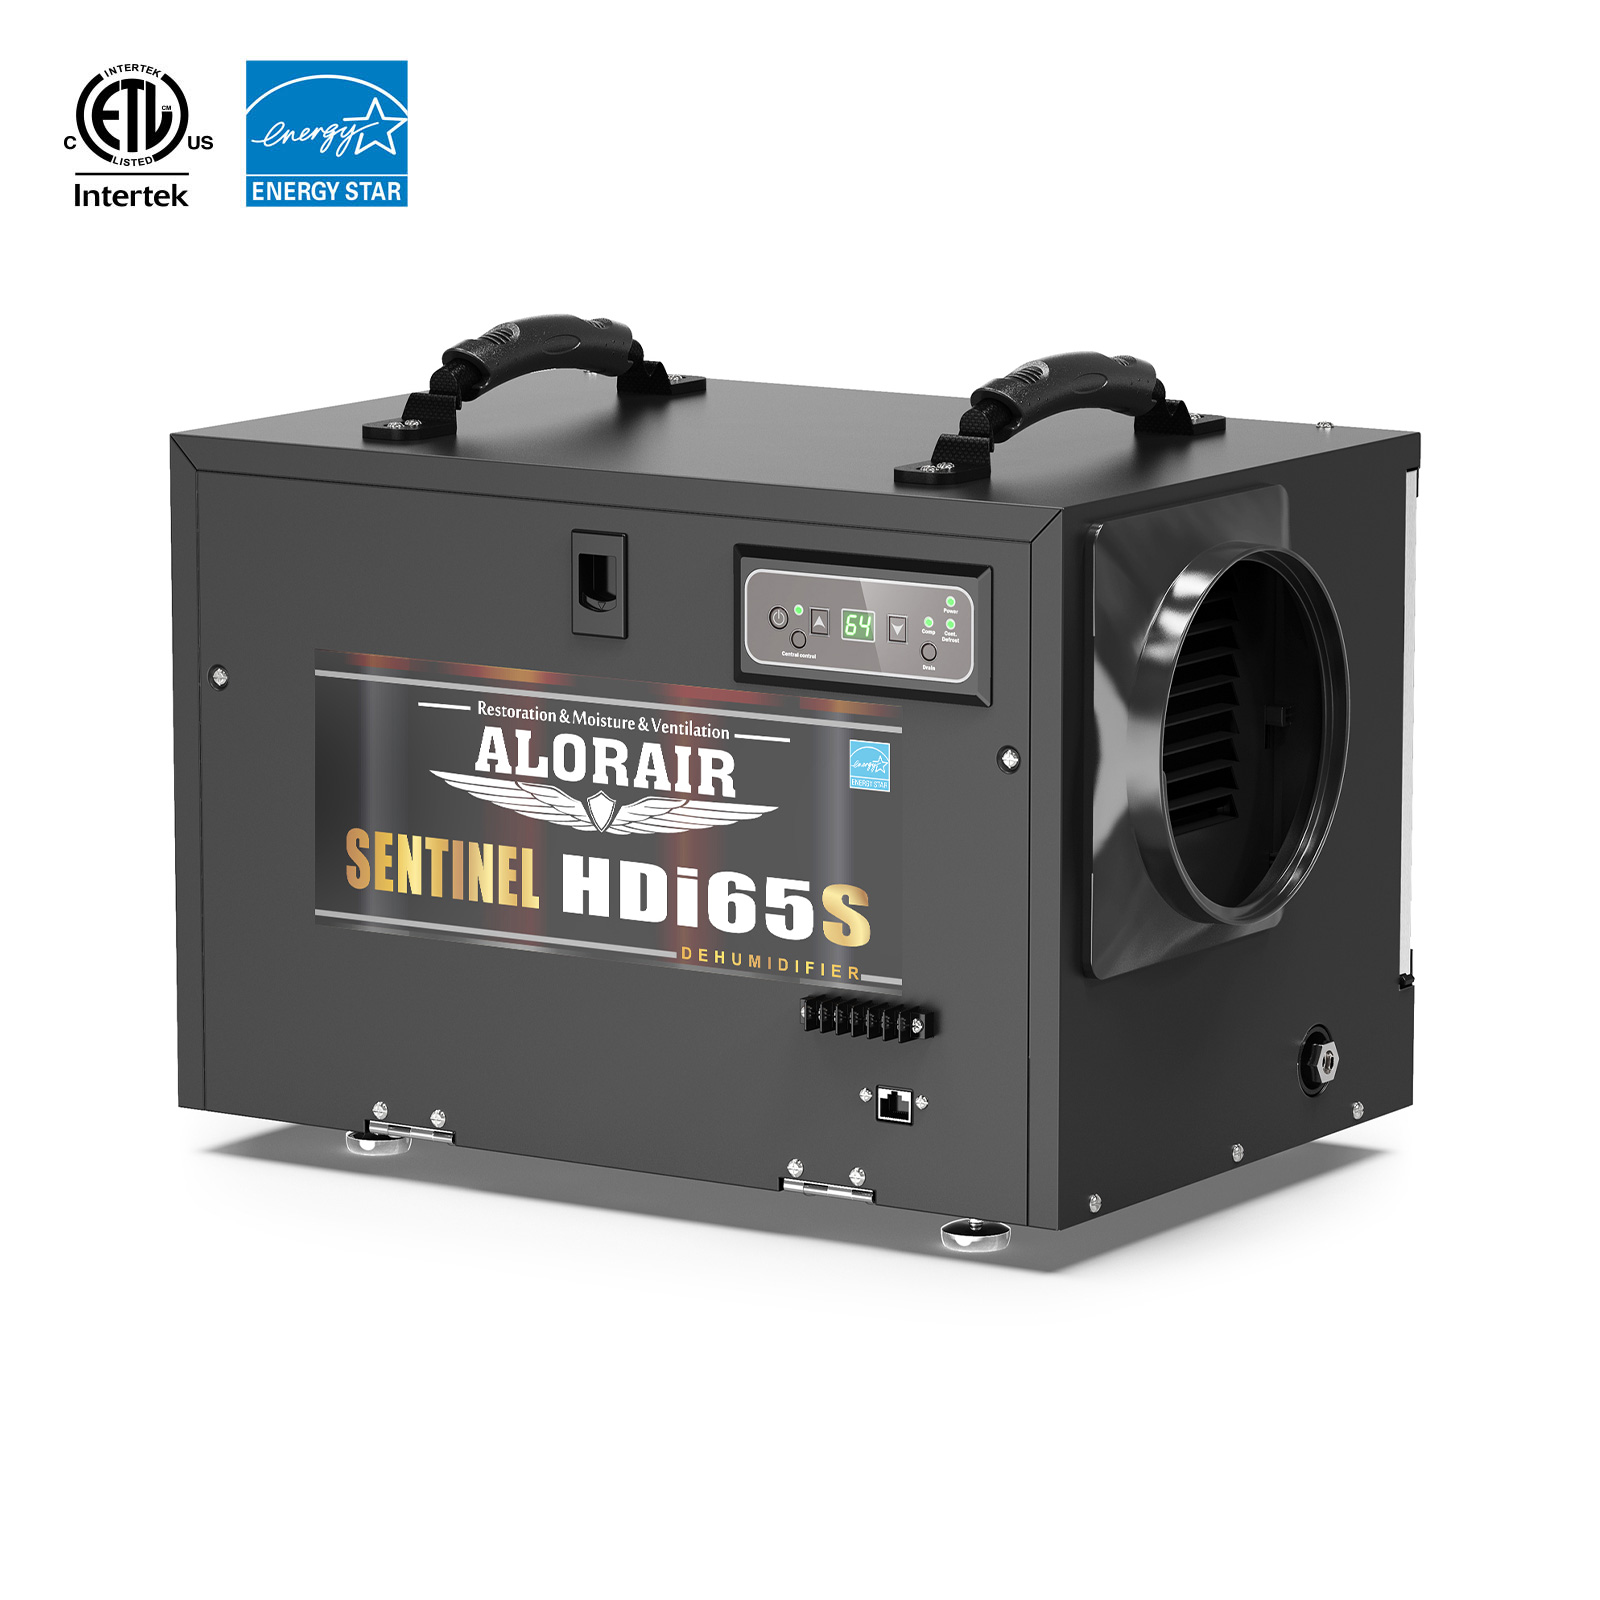 https://www.alorair.com/images/product_images/1694574584.SENTINEL-HD65S-1(4).jpg